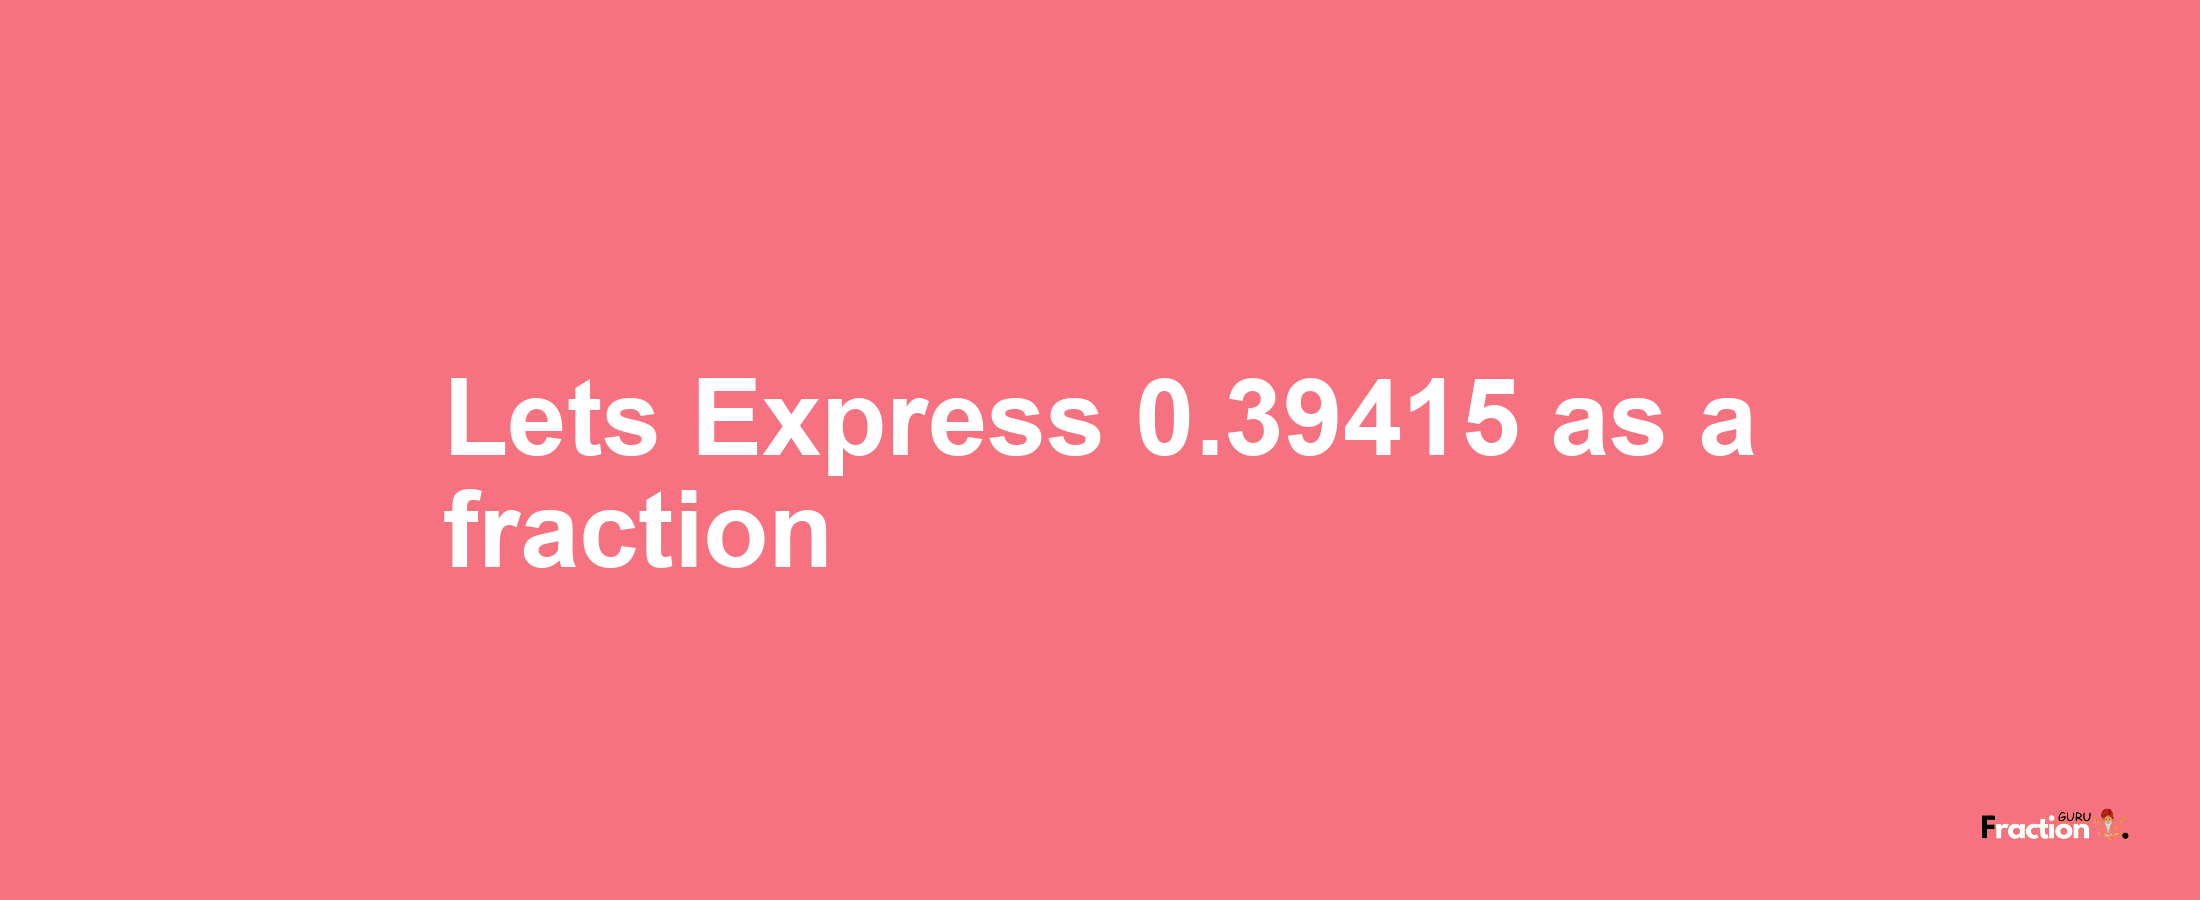 Lets Express 0.39415 as afraction